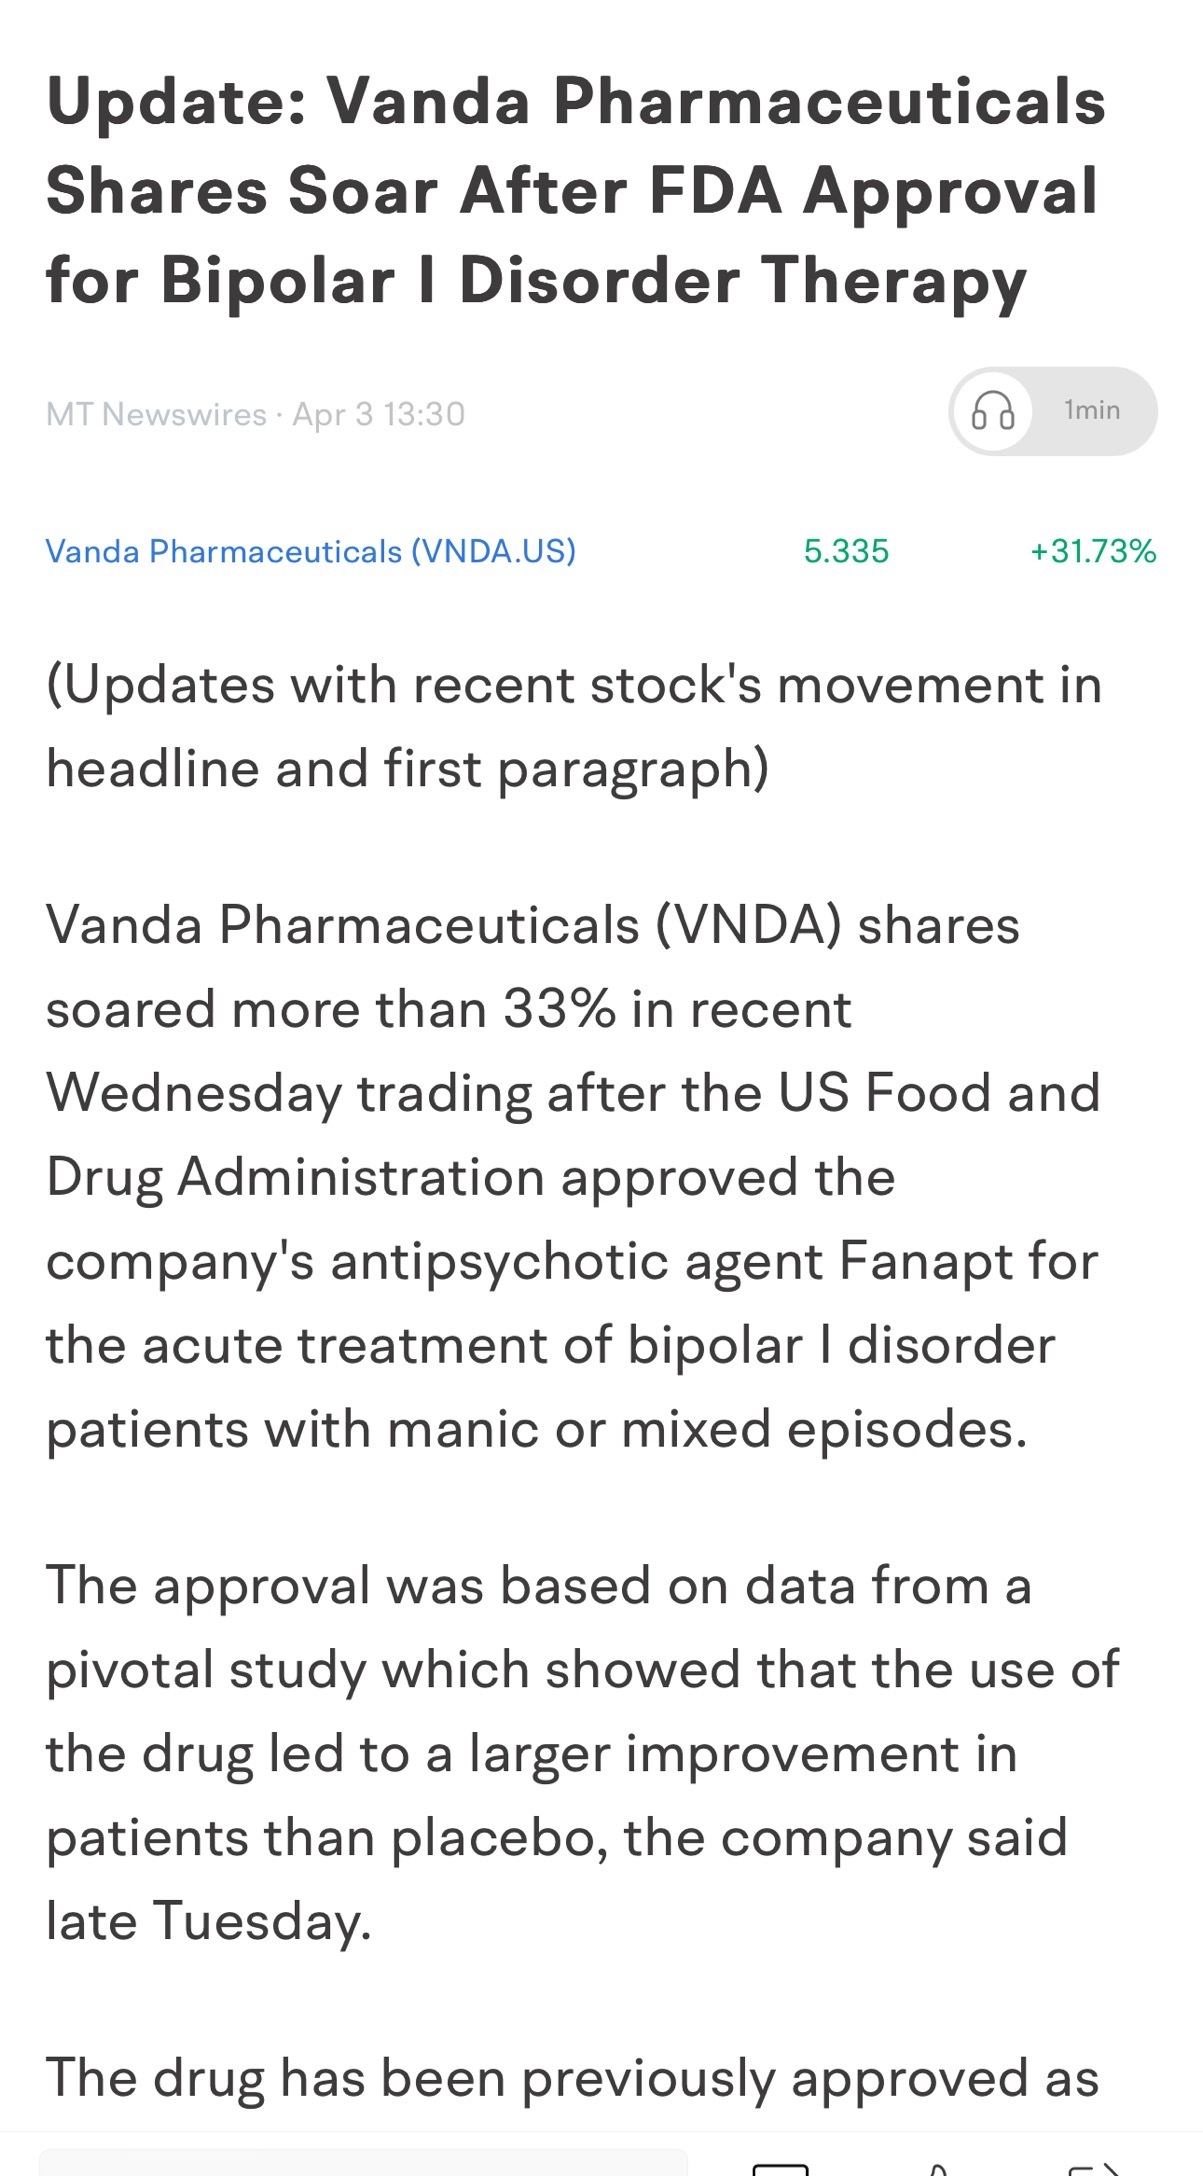 $Vanda Pharmaceuticals (VNDA.US)$ This was recently approved by FDA for bipolar.